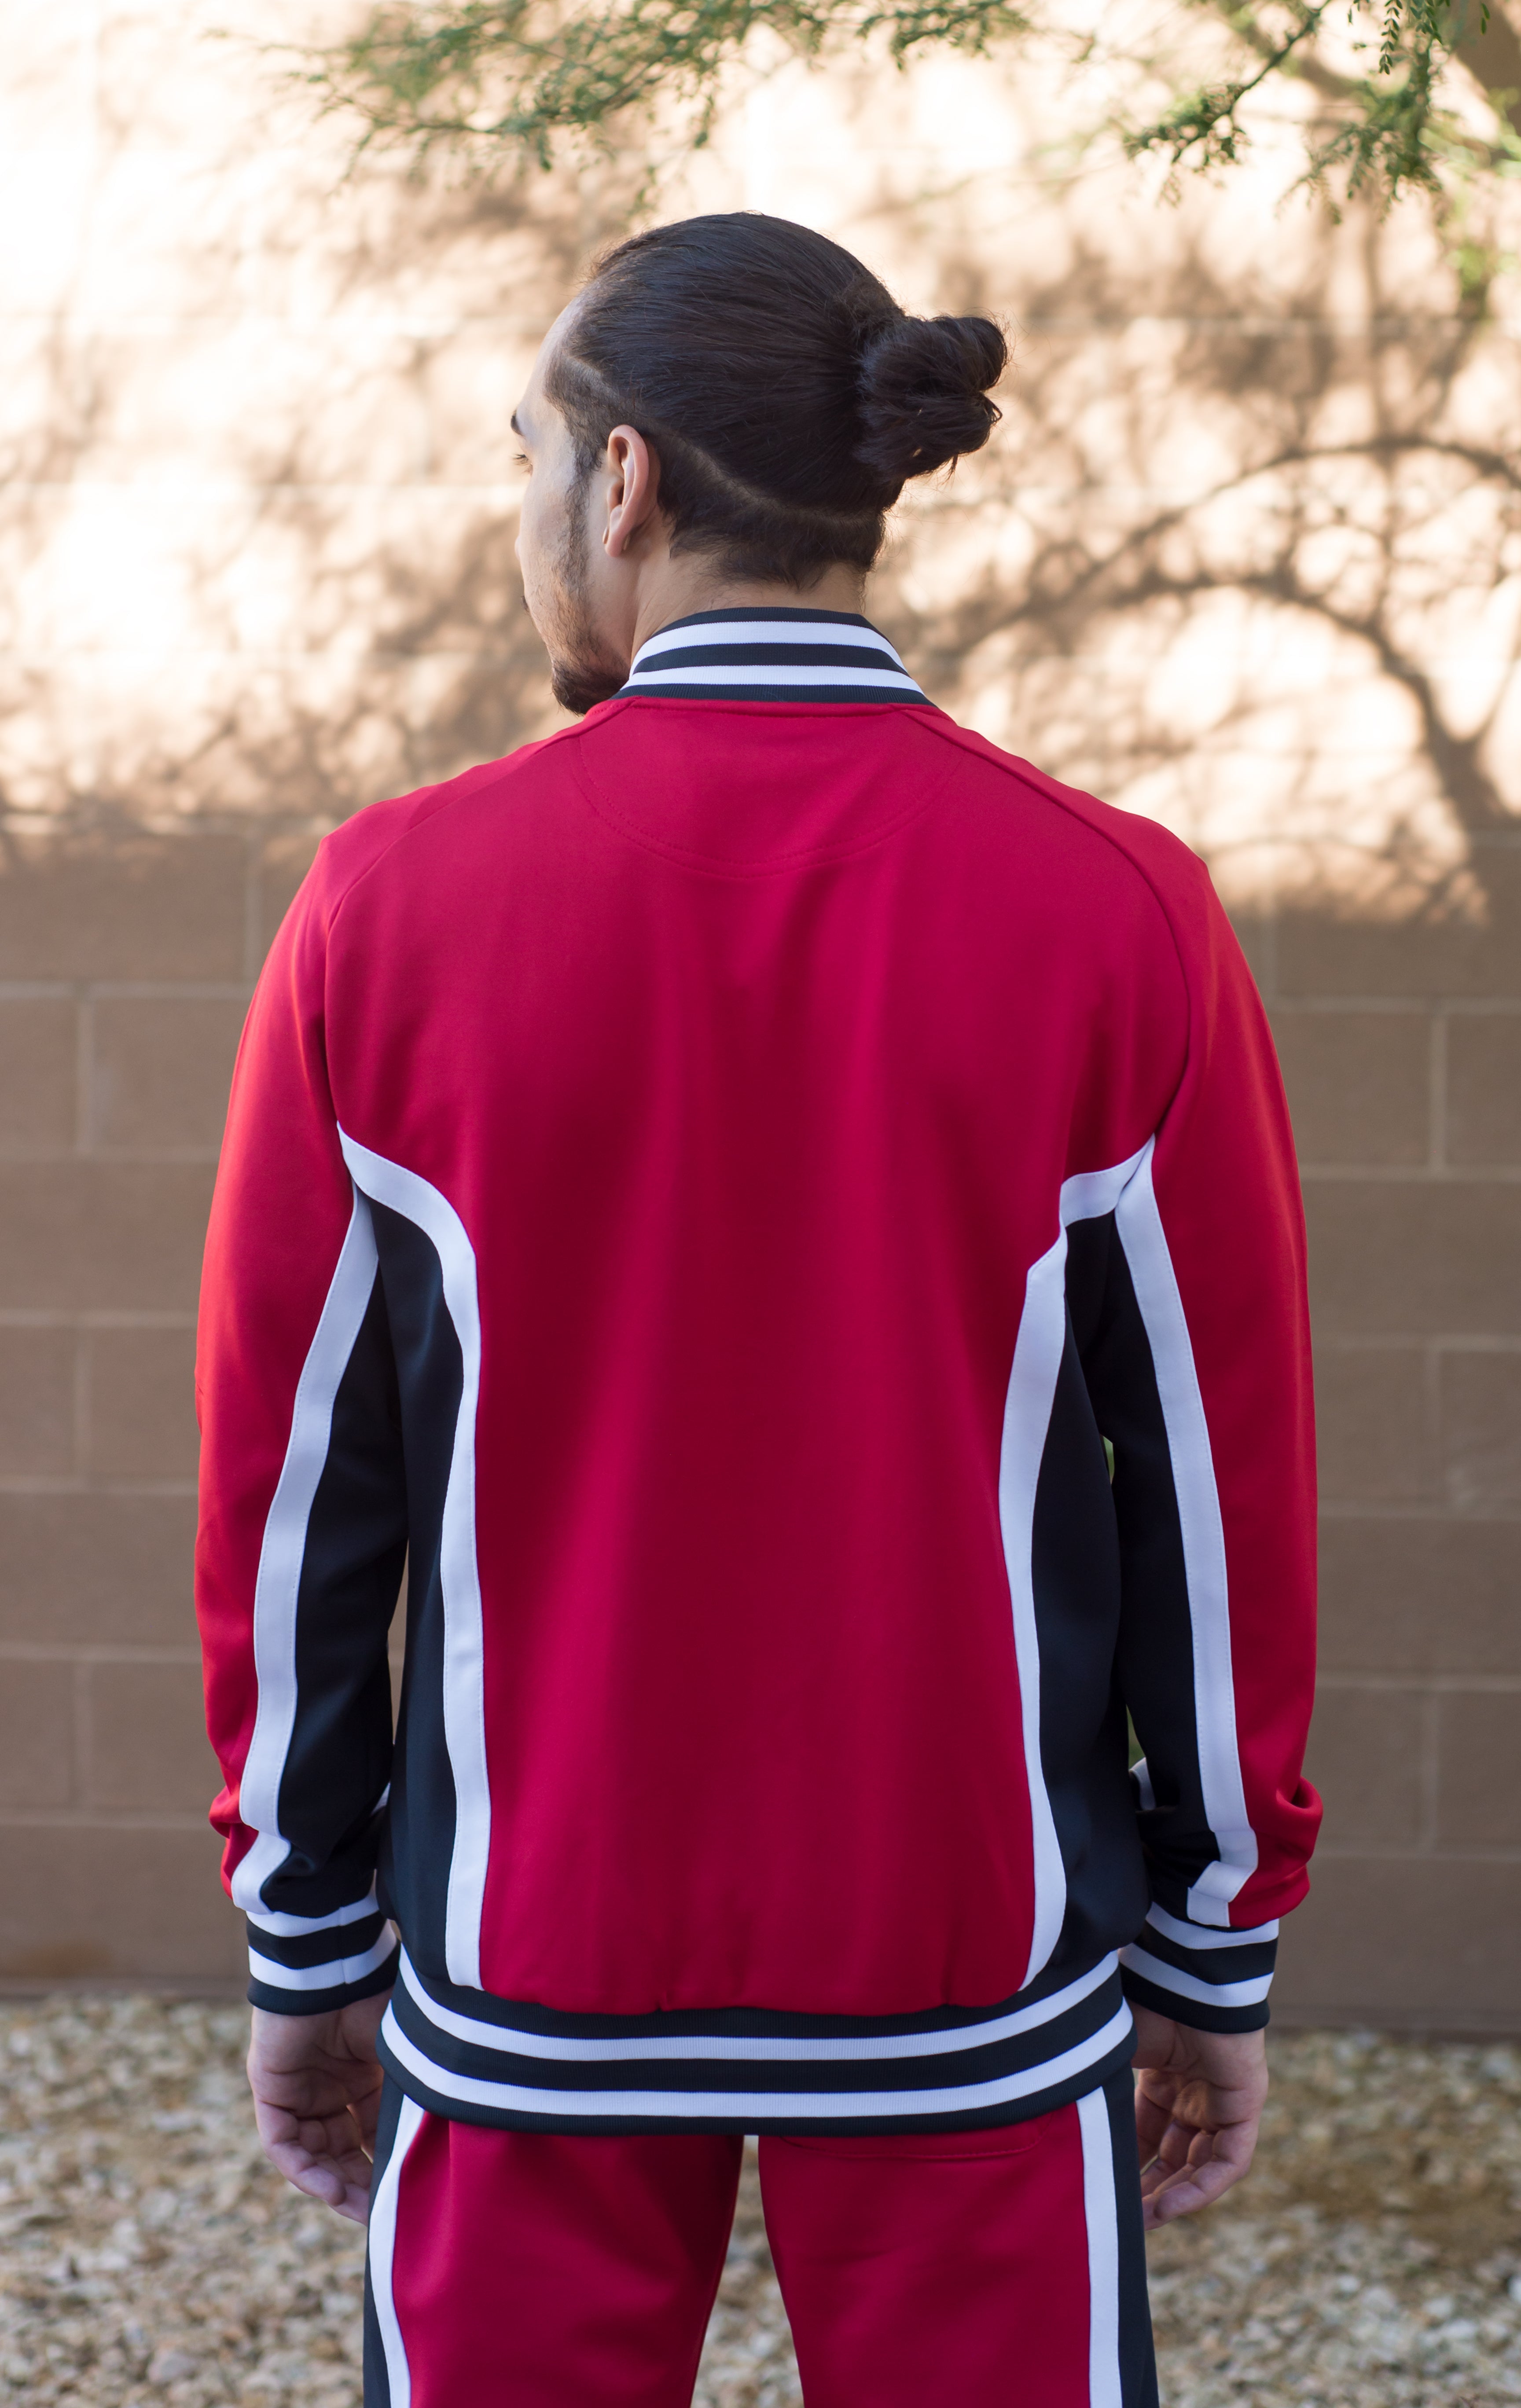 Red track suit back. Track suit top: Full zip track top silhouette with metal zipper. Dual pockets at sides. Cut & sewn contrast stripe detailing. Yarn dyed contrast stripe ribbing. 100% Polyester jersey bound mesh inside lining. Extremely smooth material and soft to the touch. Track suit bottom: Tapered-leg track pant silhouette, rubber dipped drawstrings with metal tips. Dual pockets at sides and zipper gussets at both inner ankle openings.